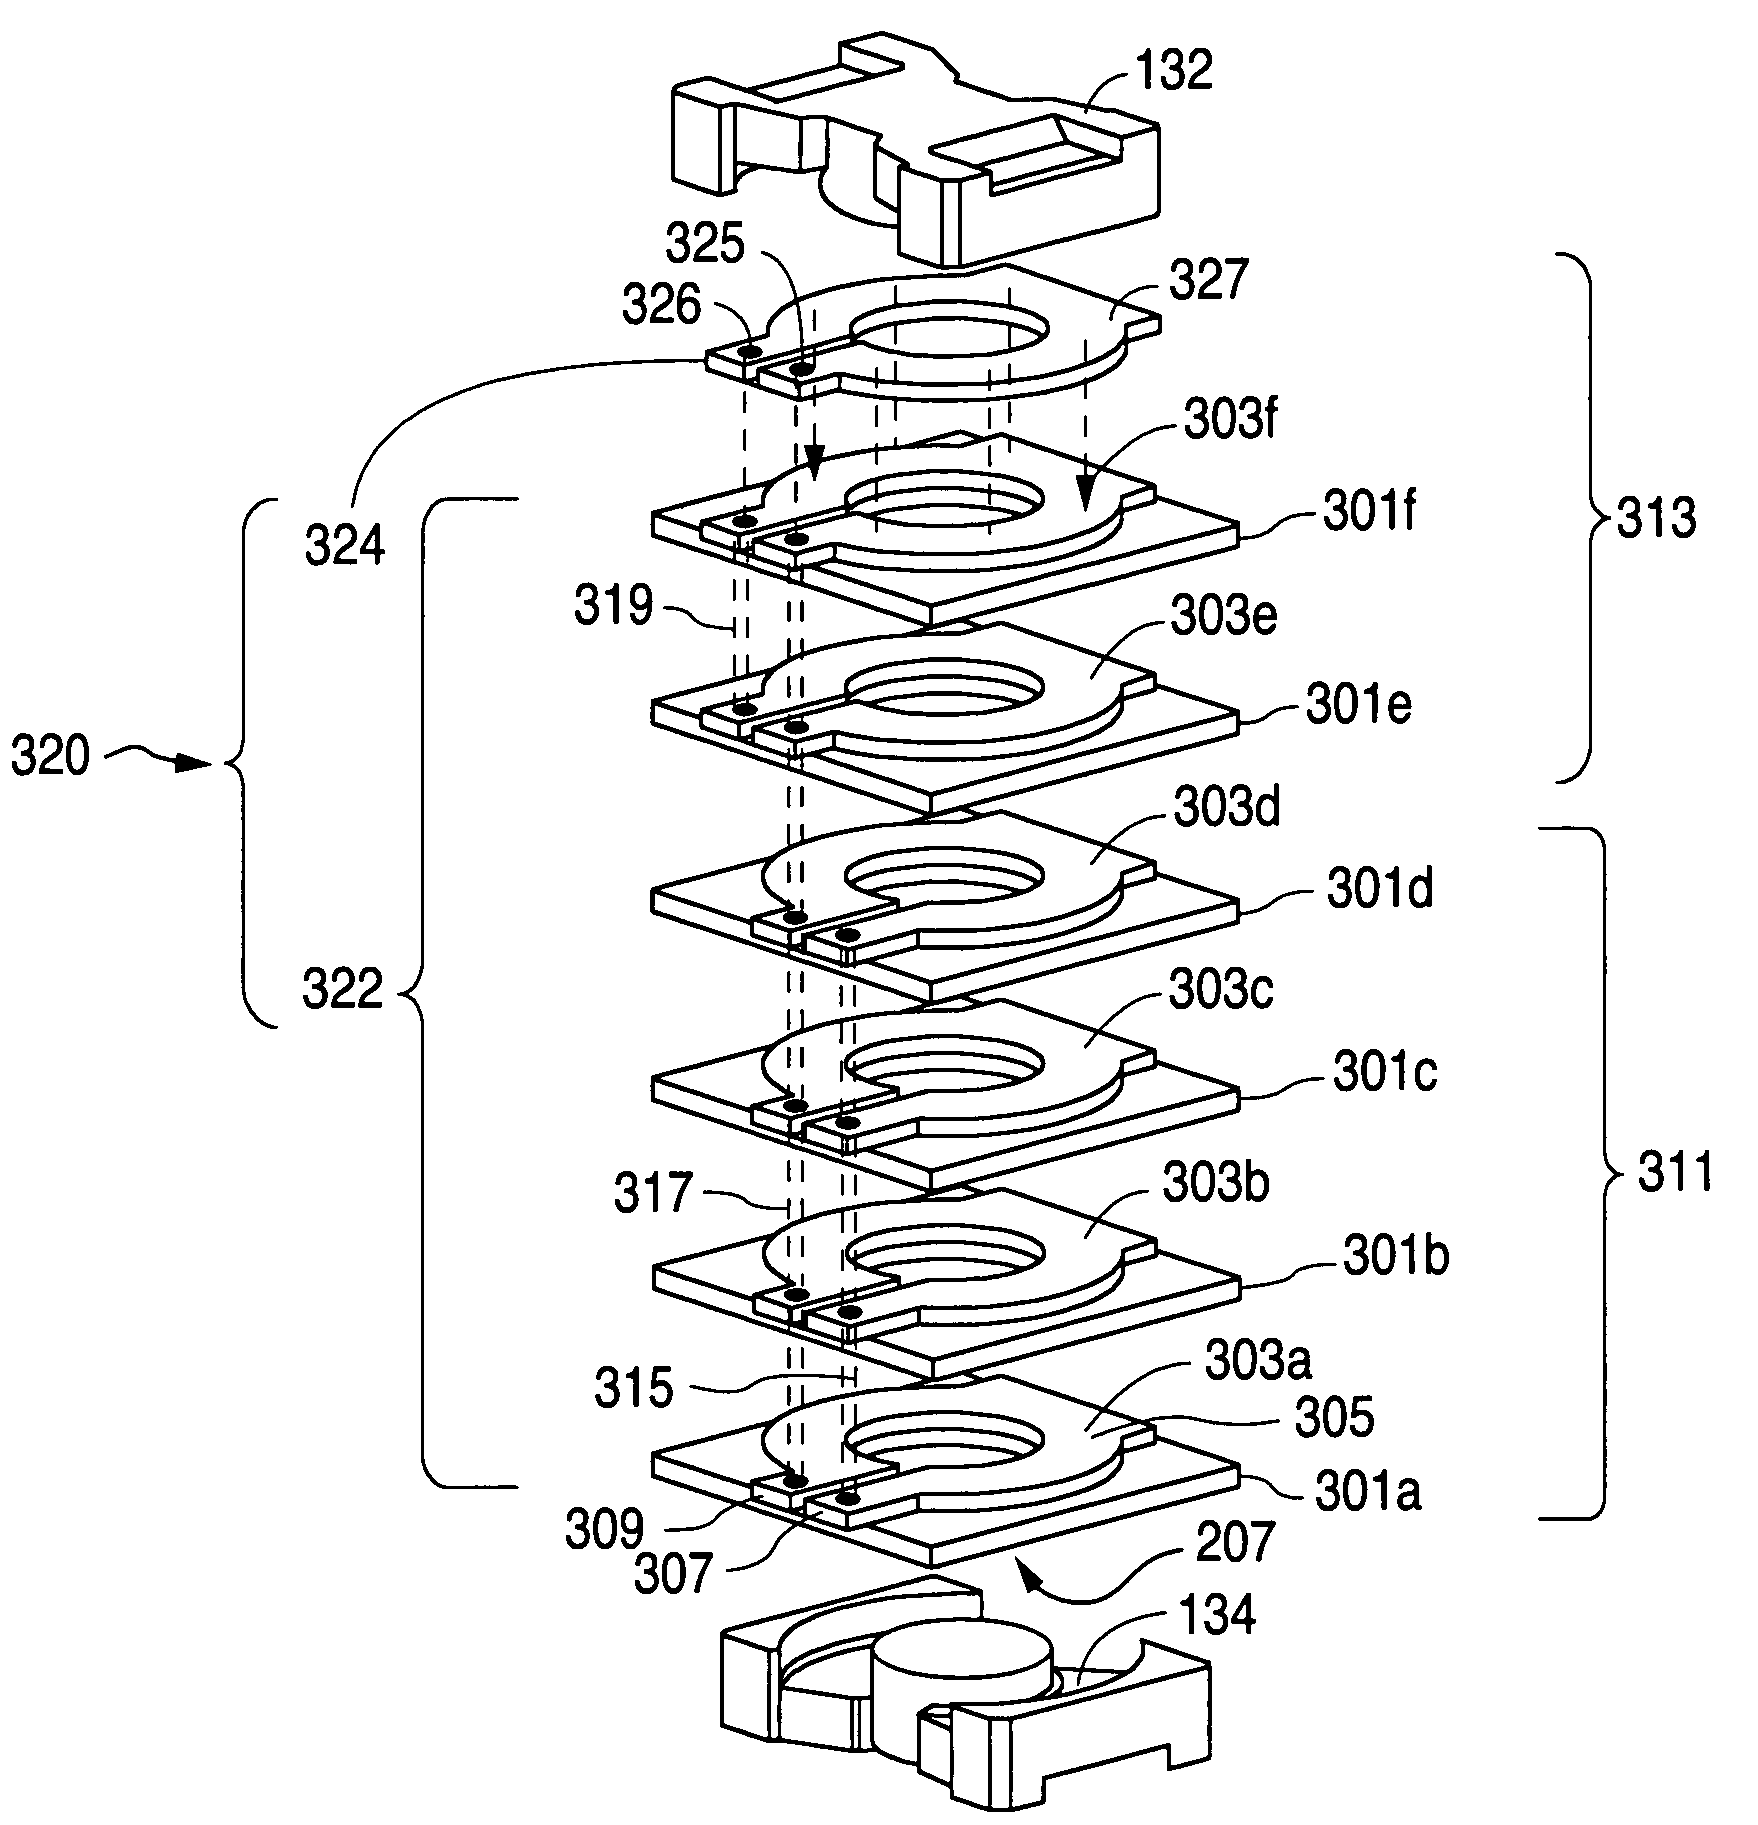 Multi-layer printed circuit board inductor winding with added metal foil layers